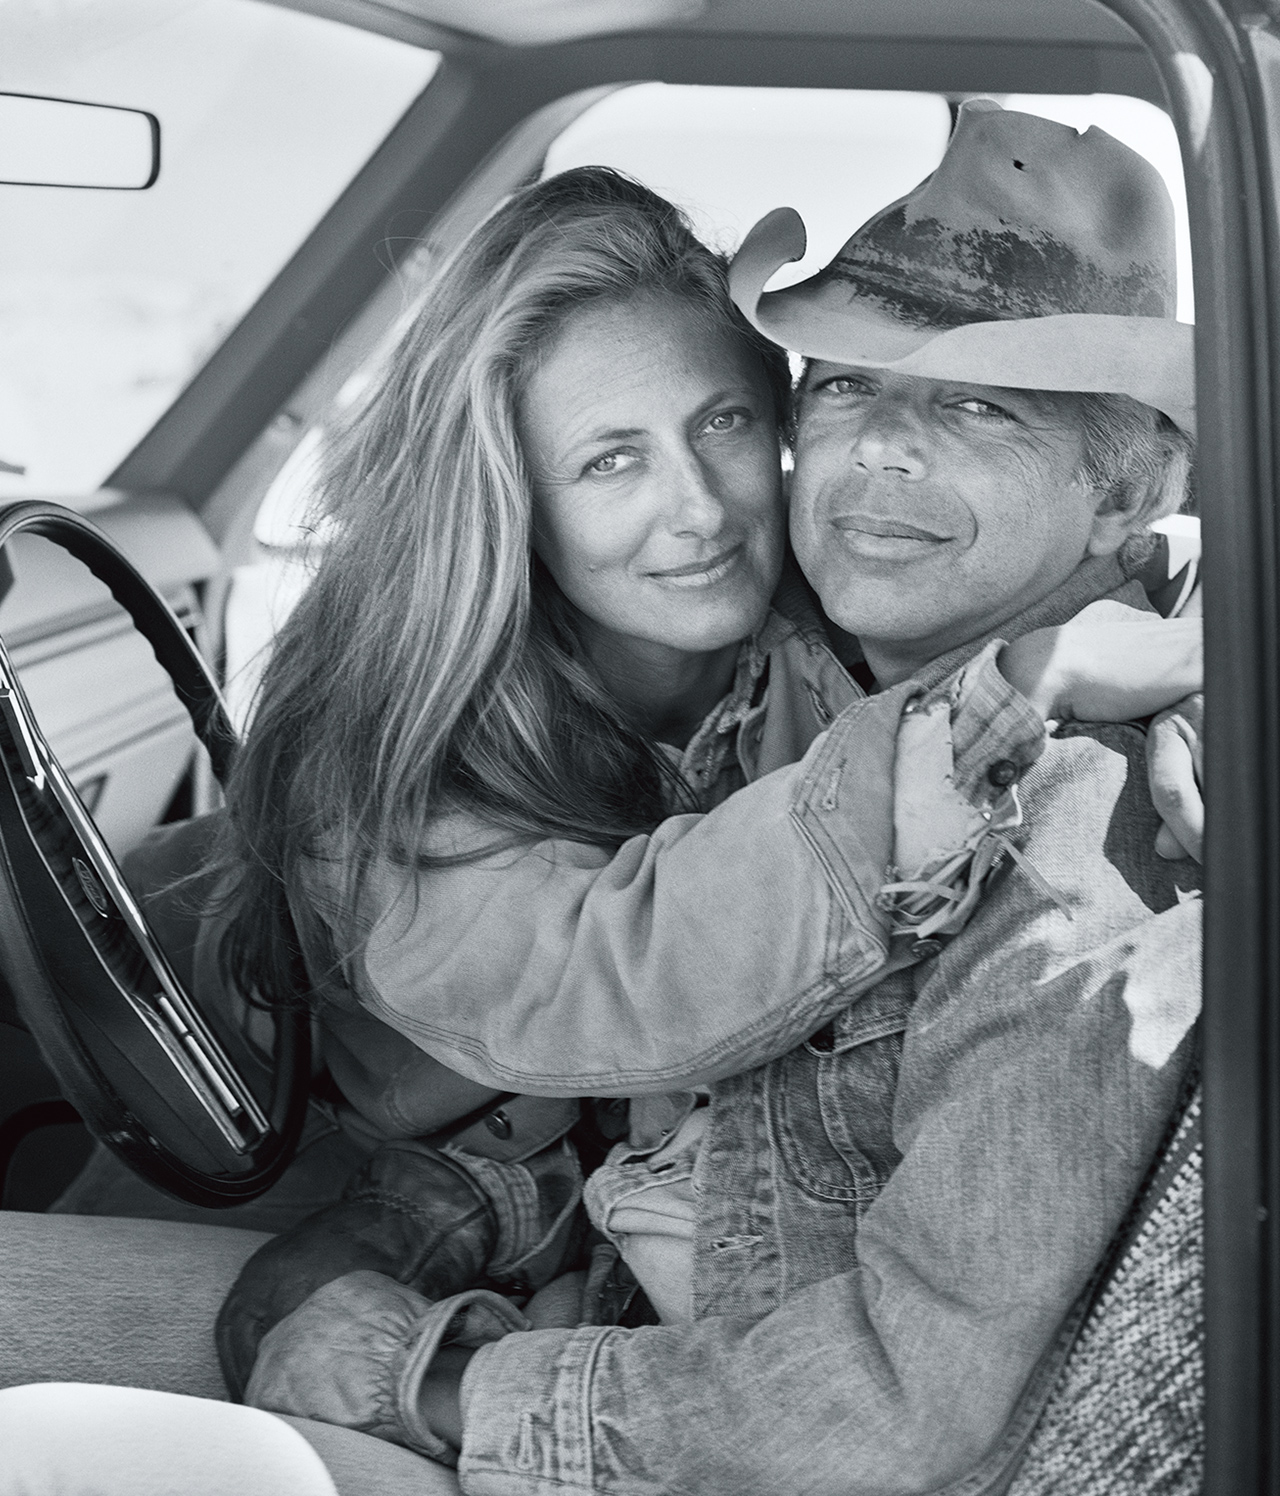                             Ricky and Ralph Lauren posed for this portrait from inside a pickup truck on the Double RL Ranch